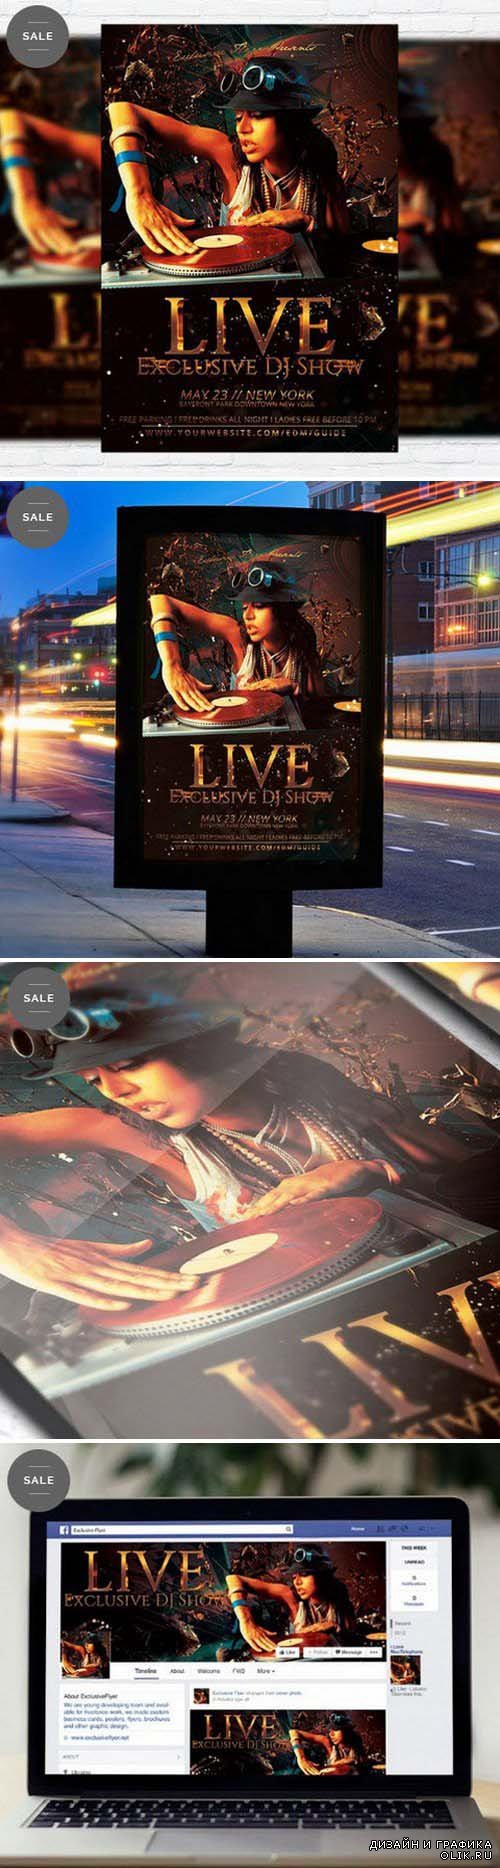 Flyer Template - Exclusive Dj Live Show + Facebook Cover